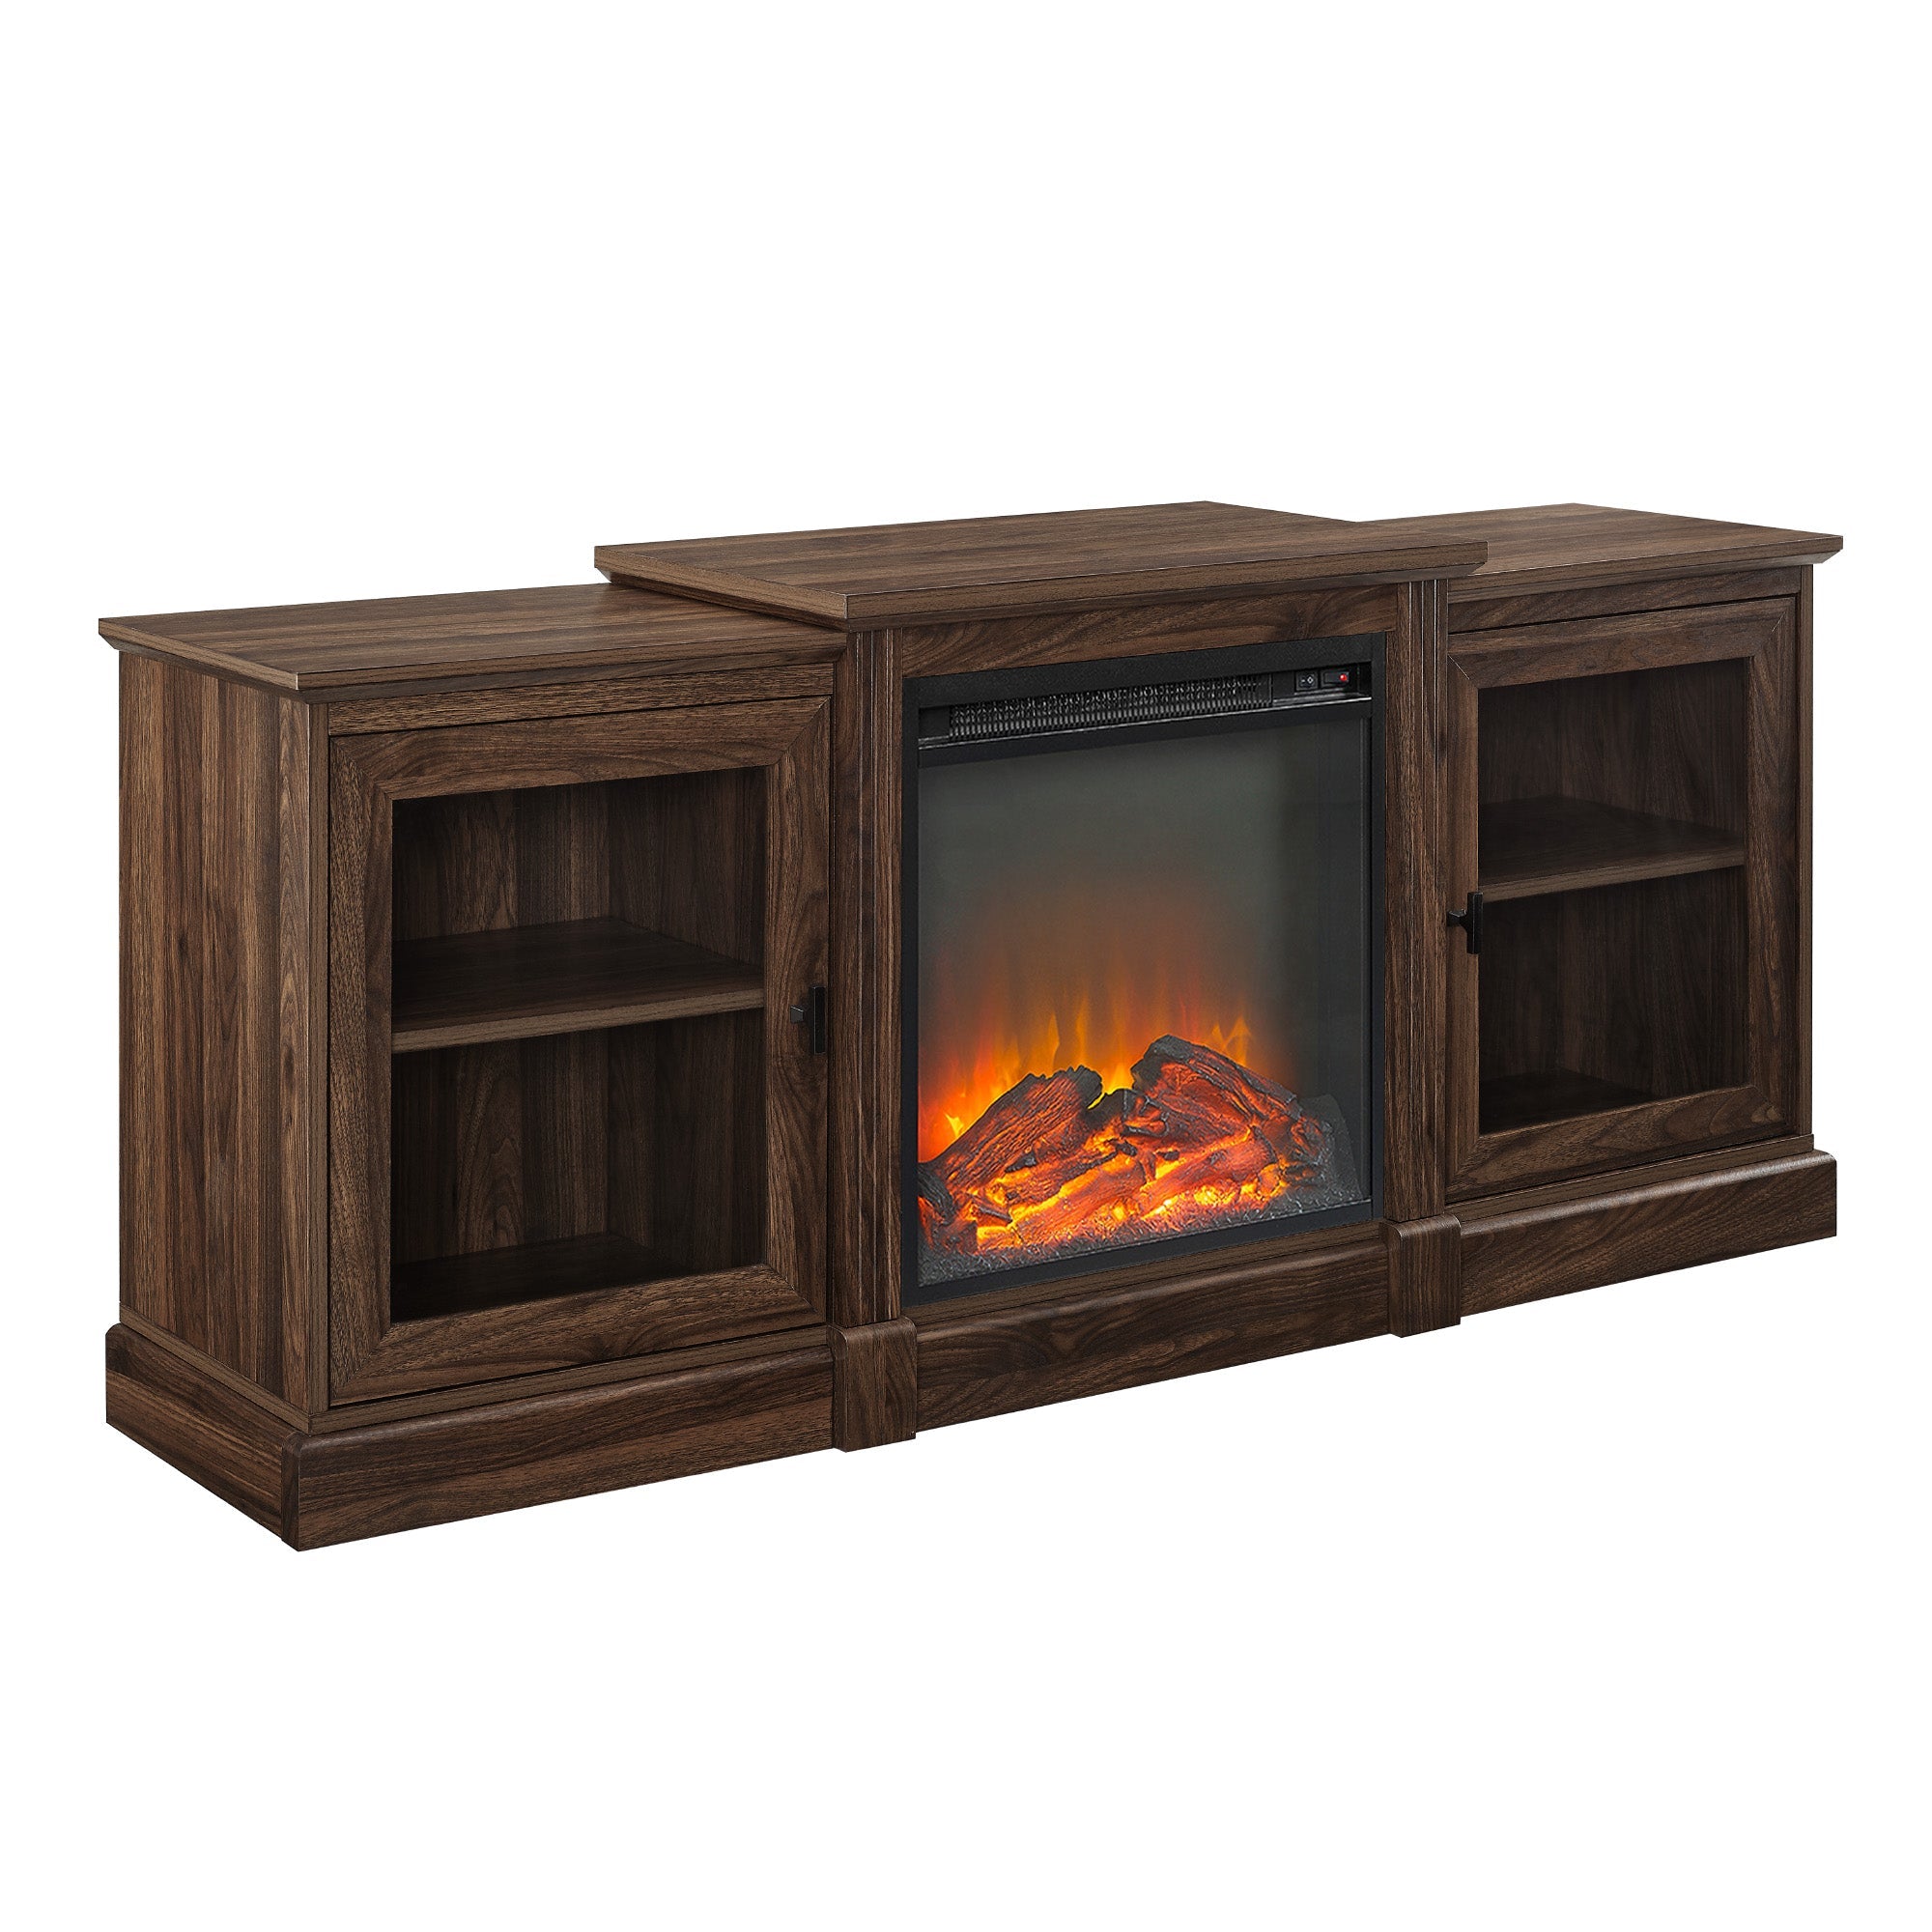 60" Classic Tiered Top Fireplace TV Console - East Shore Modern Home Furnishings